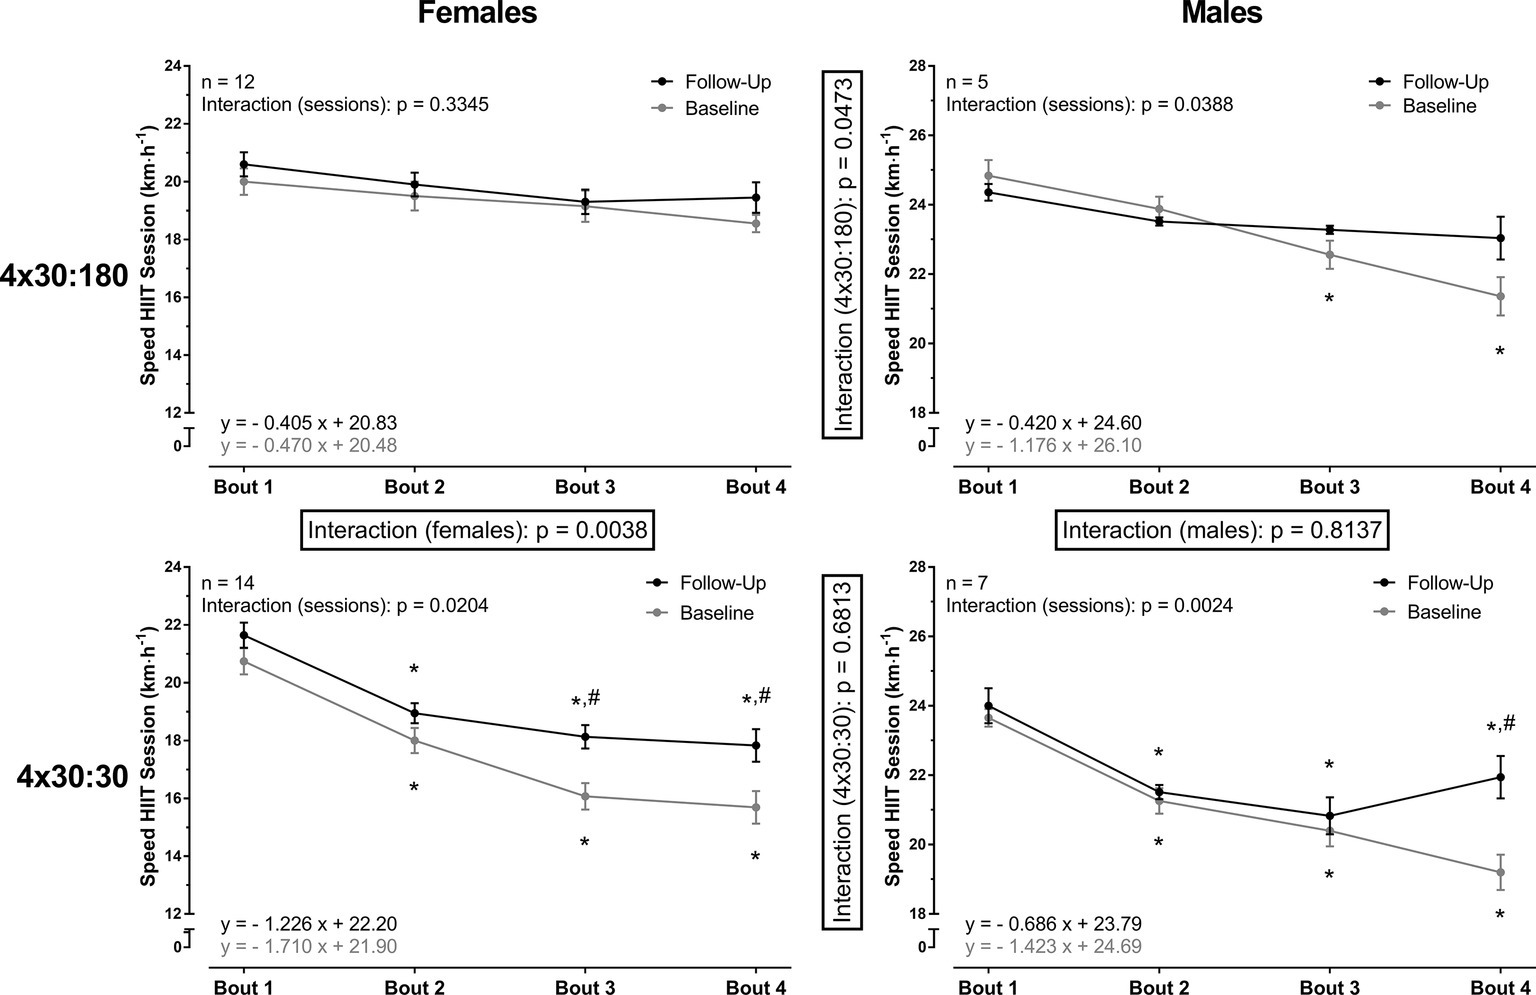 Frontiers Sex Differences In High Intensity Interval Trainingare